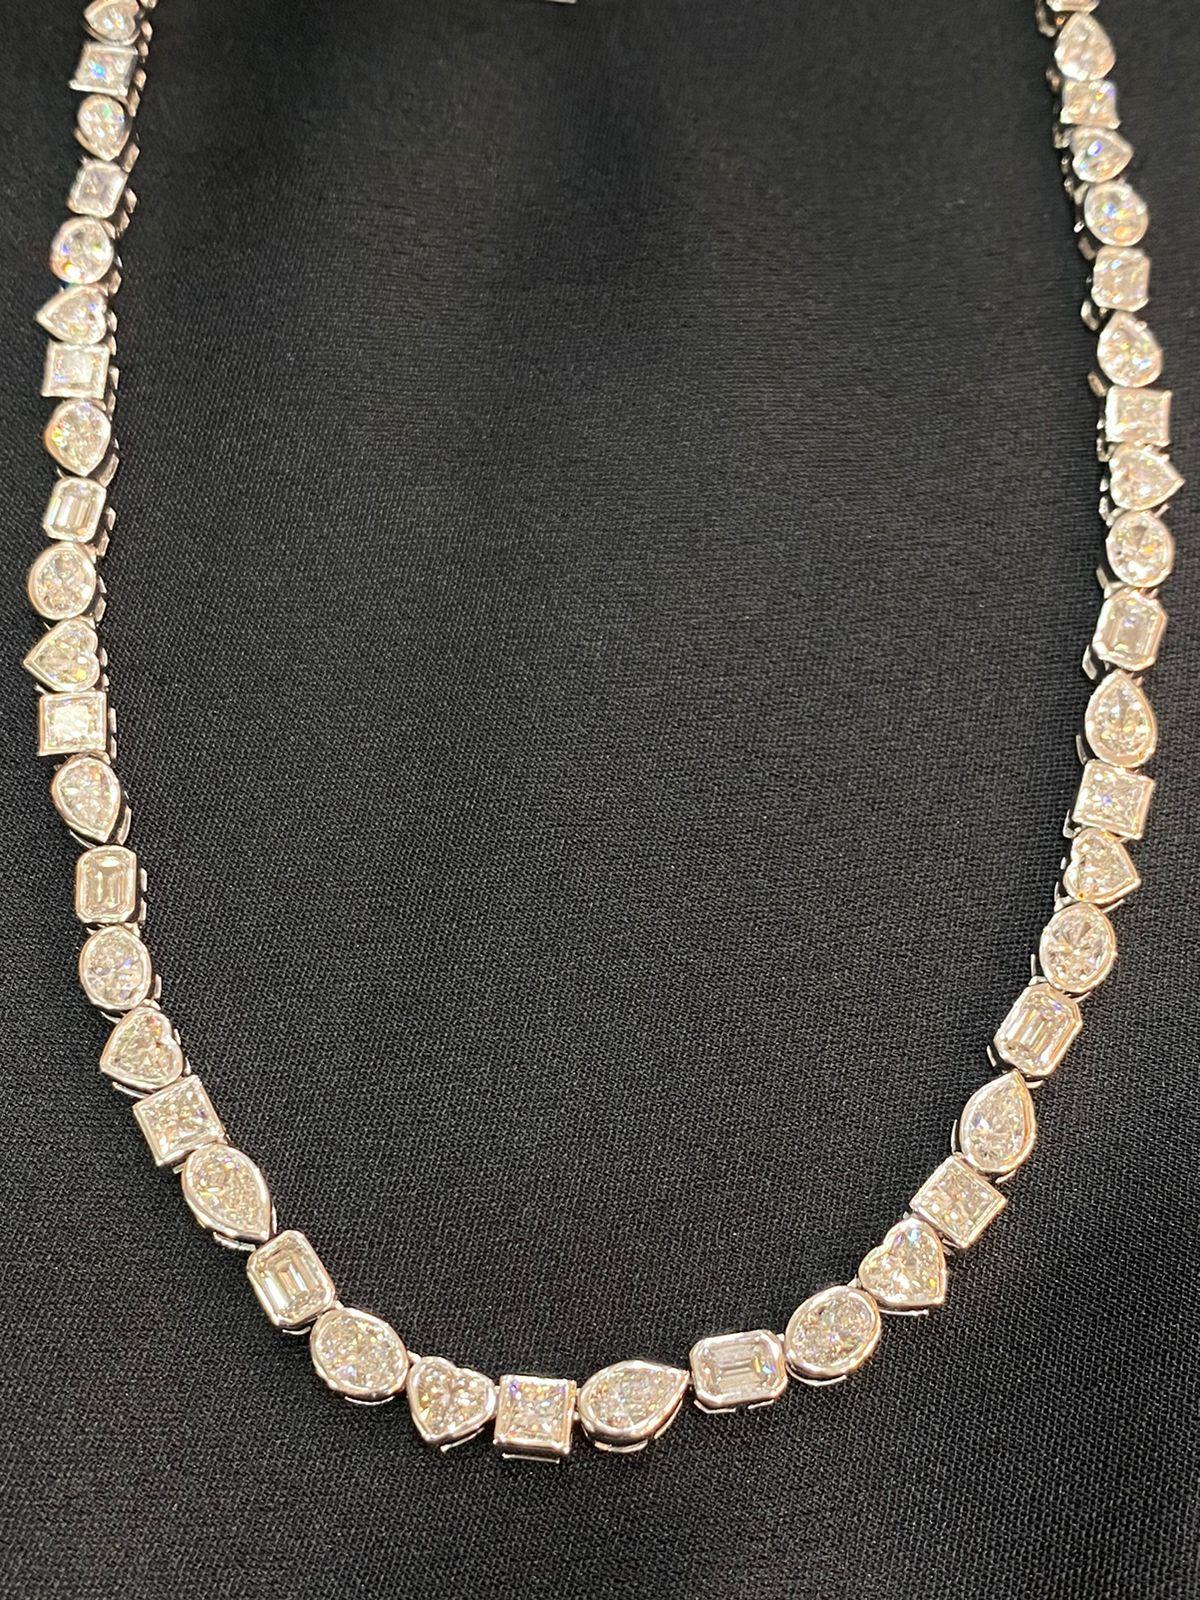 Mixed Cut Amazing 27.00 Carats Special Cut Diamonds 18K Gold Tennis Necklace  For Sale